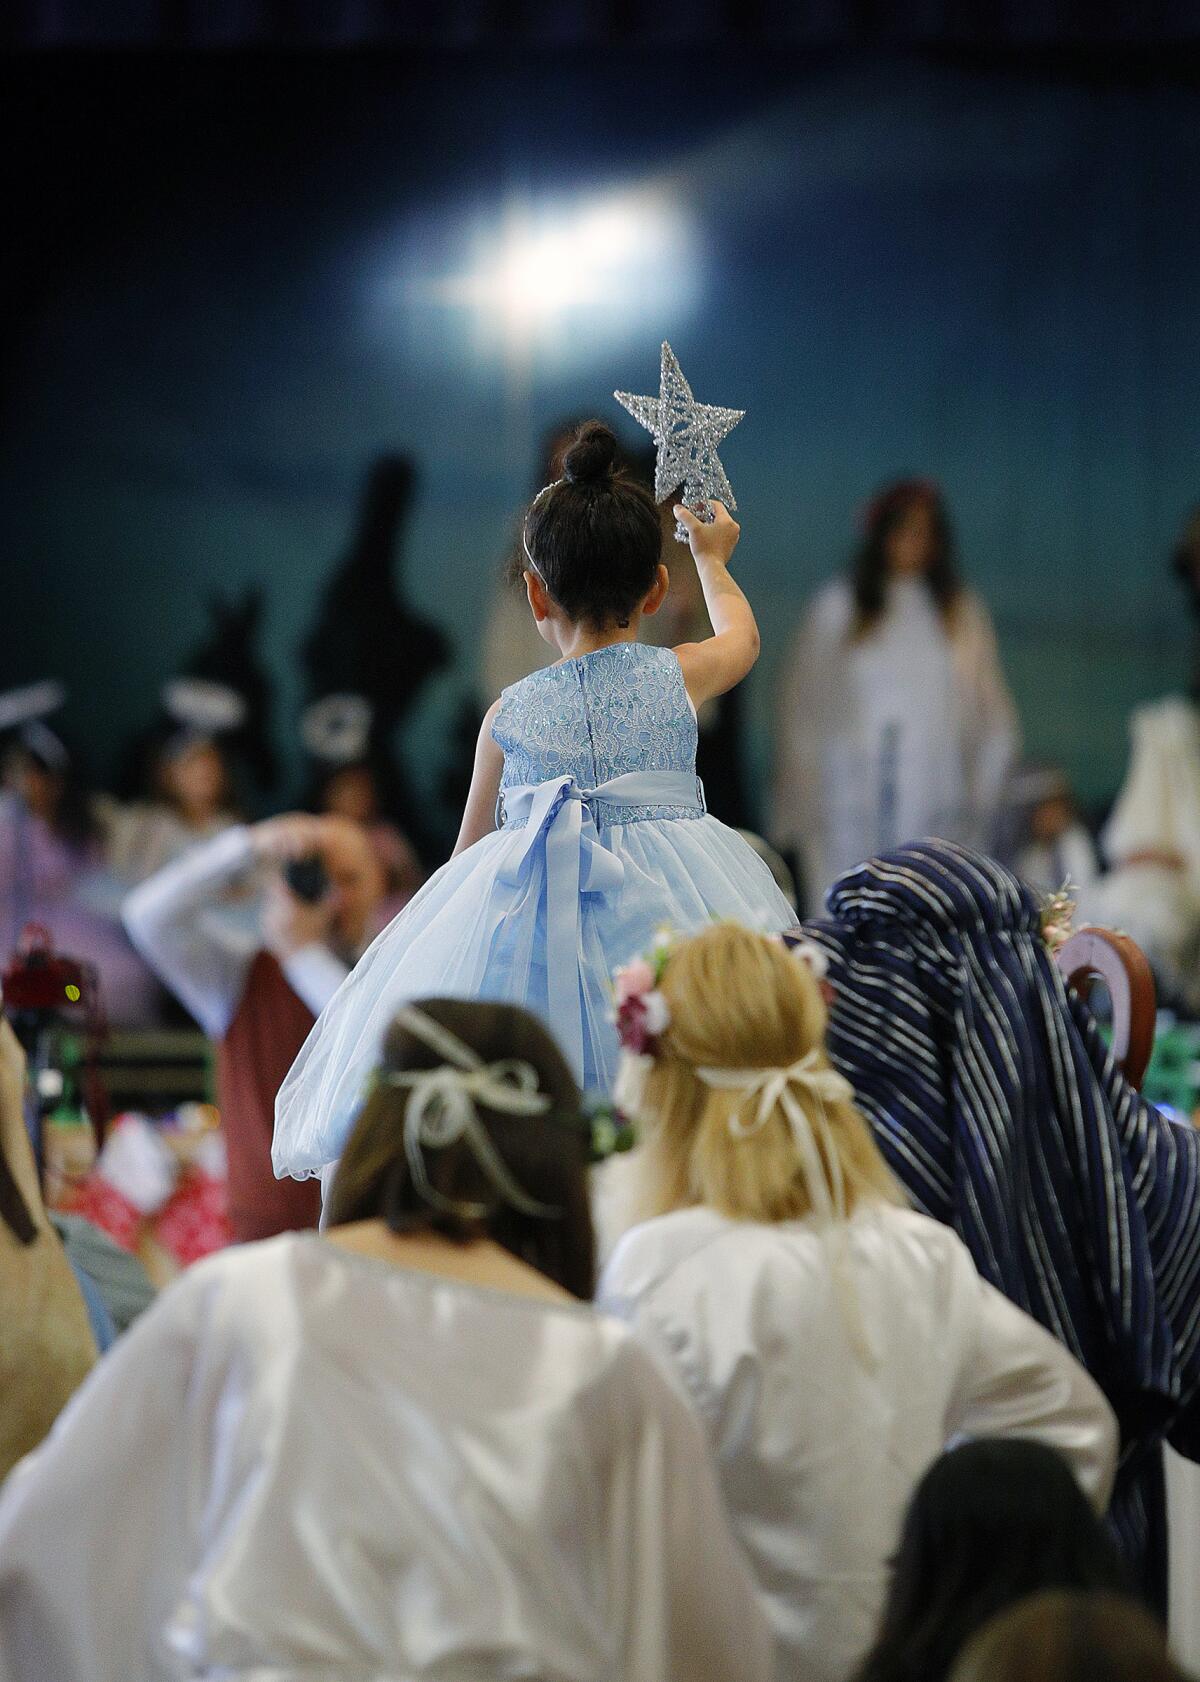 Amira Istanboullian, playing the Star of Bethlehem, rides high on the shoulders of a parent as she leads a group to the stage for the St. Robert Bellarmine Catholic School's holiday show called "Once Upon a Christmas," presented by the school's kindergarten class at St. John Paul II STEM Academy in St. Eleanor Hall on Monday. The story was told sequentially from the birth of Jesus to the arrival of angels by kindergartners from the school.